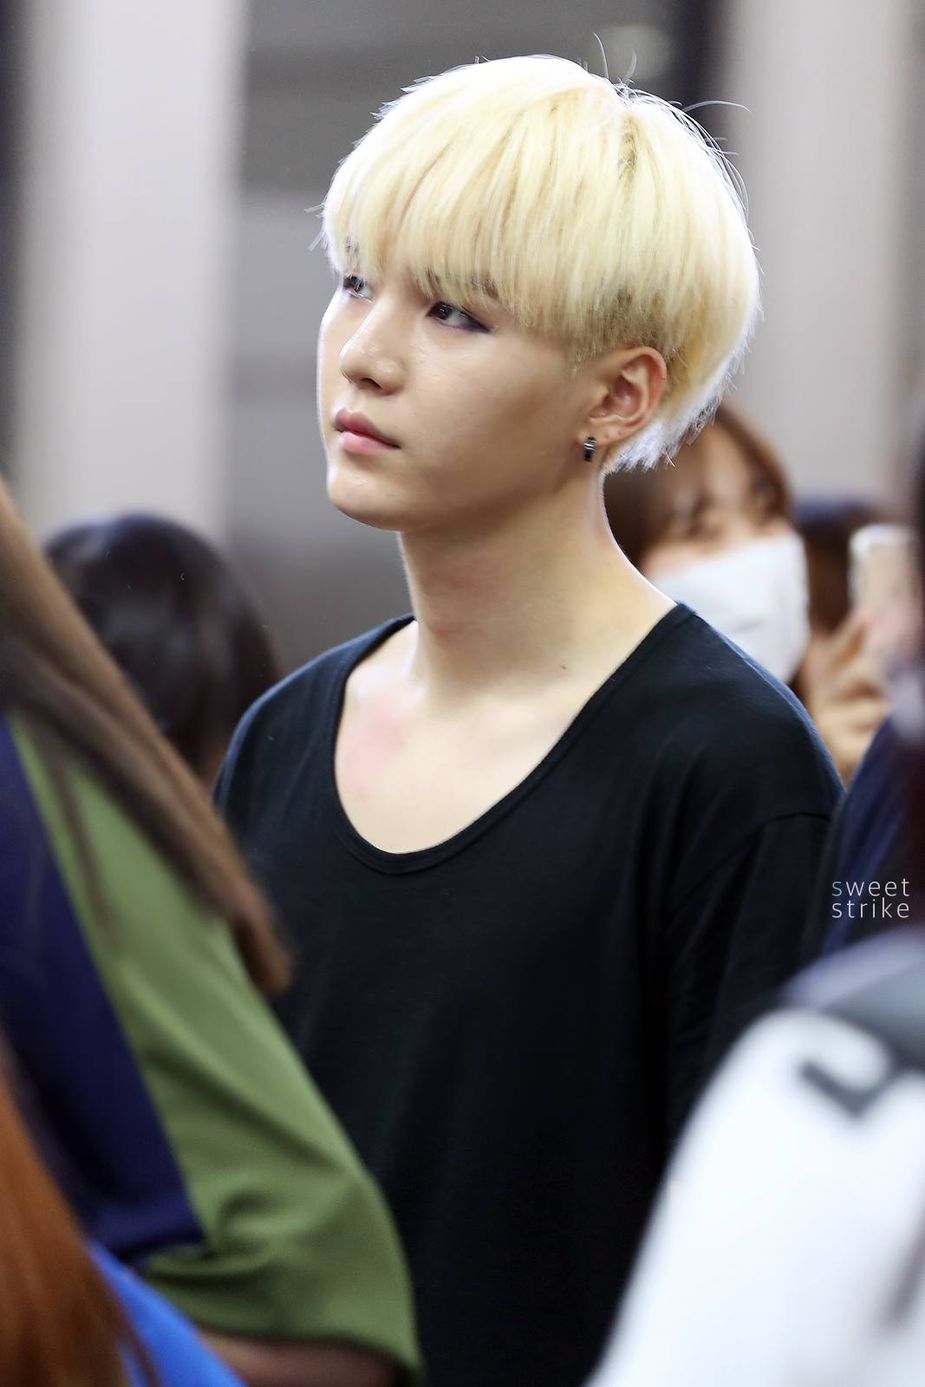 BTS Suga Struggles With Depression Over His Appearance - Koreaboo